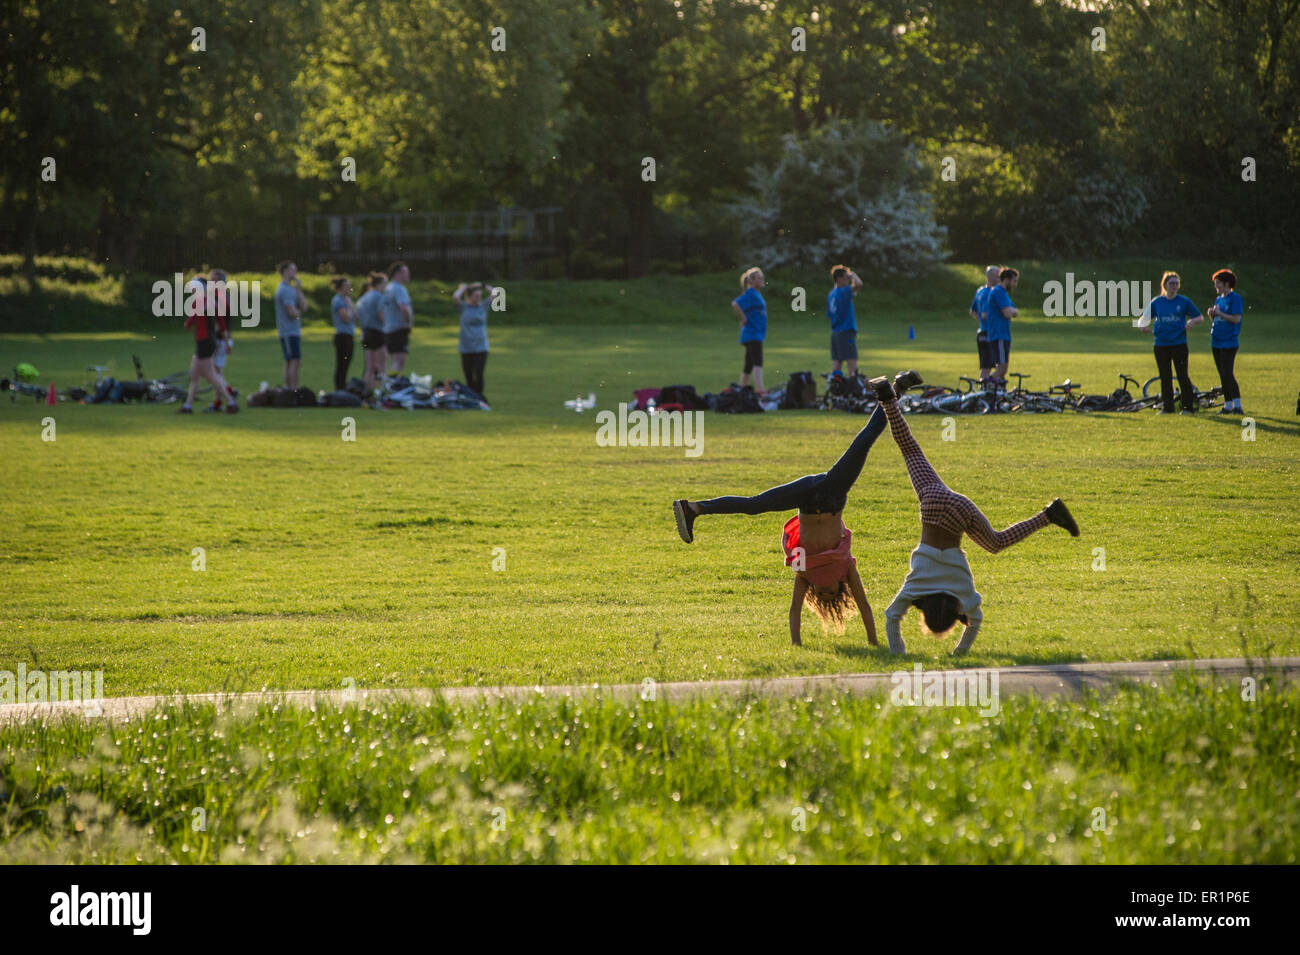 Two girls cartwheel on a summer's day in a London parl Stock Photo